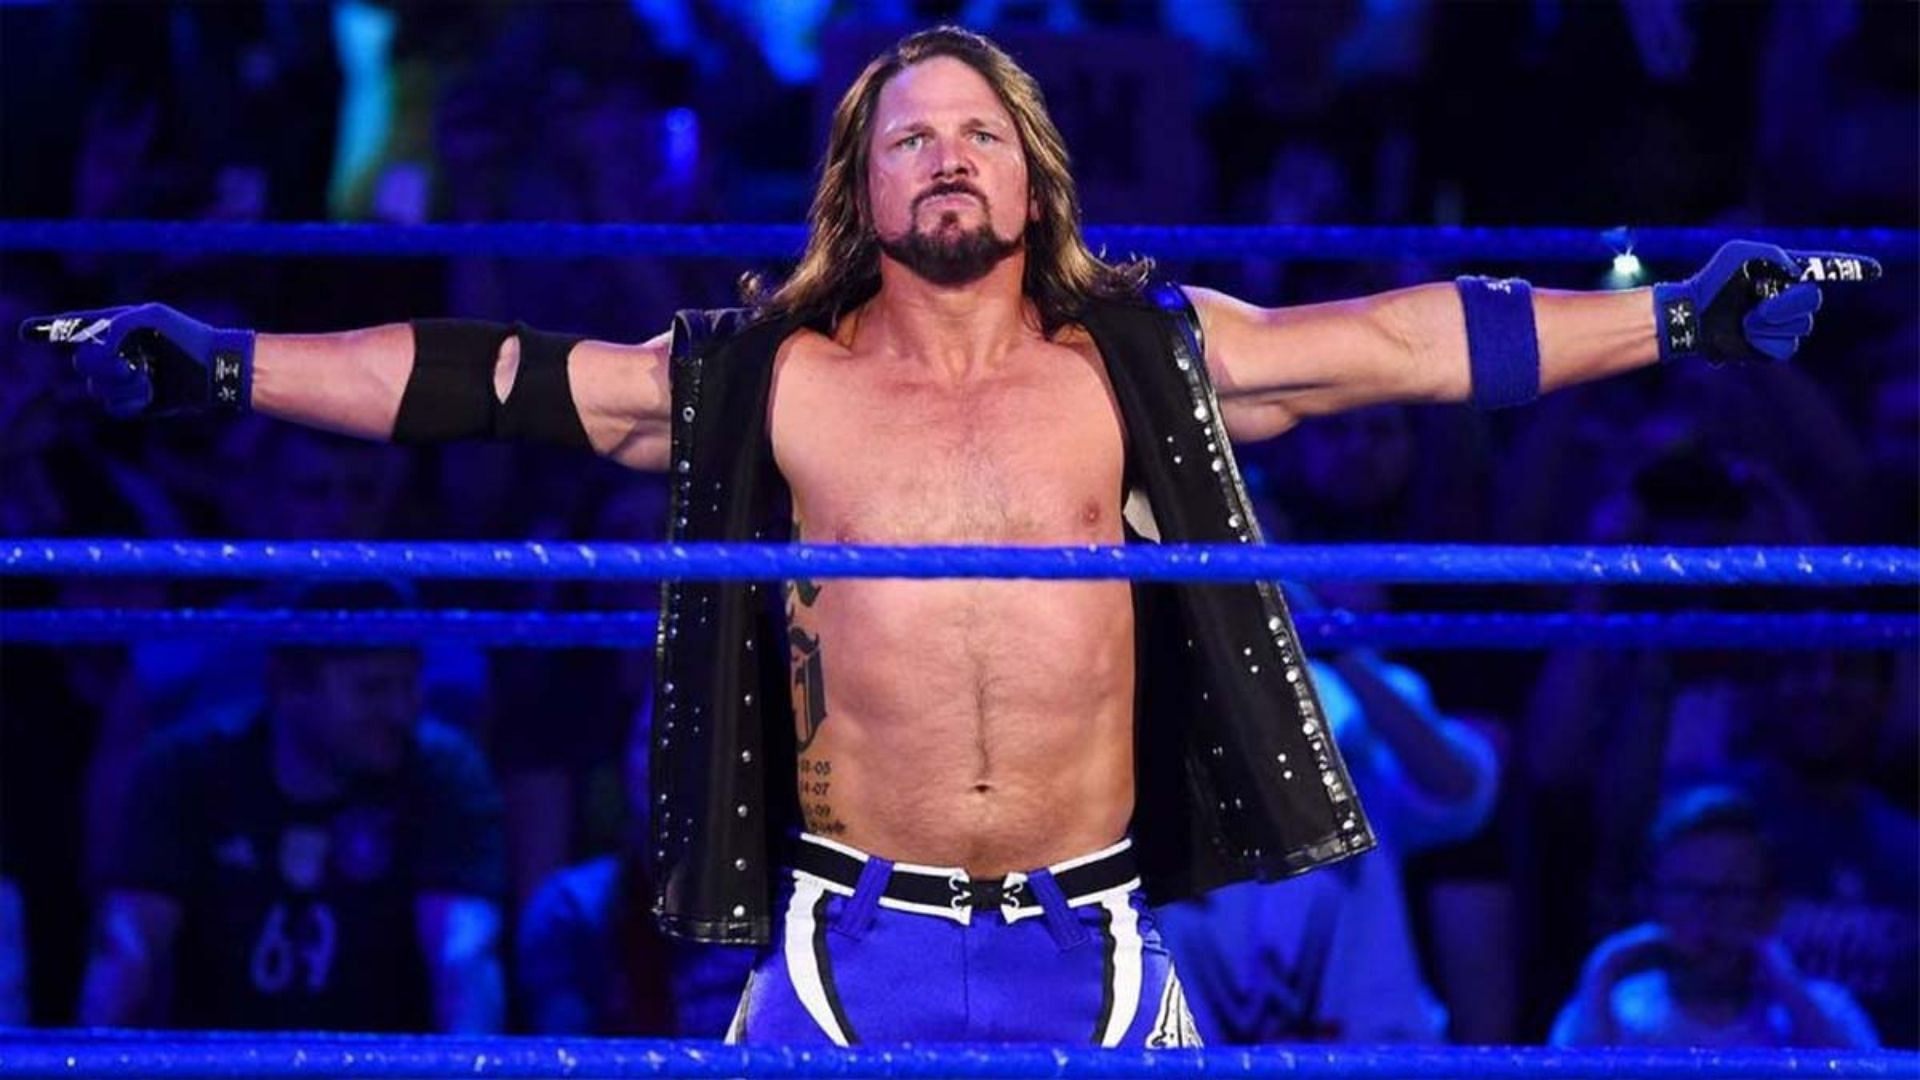 AJ Styles wrestled for many years before coming to WWE